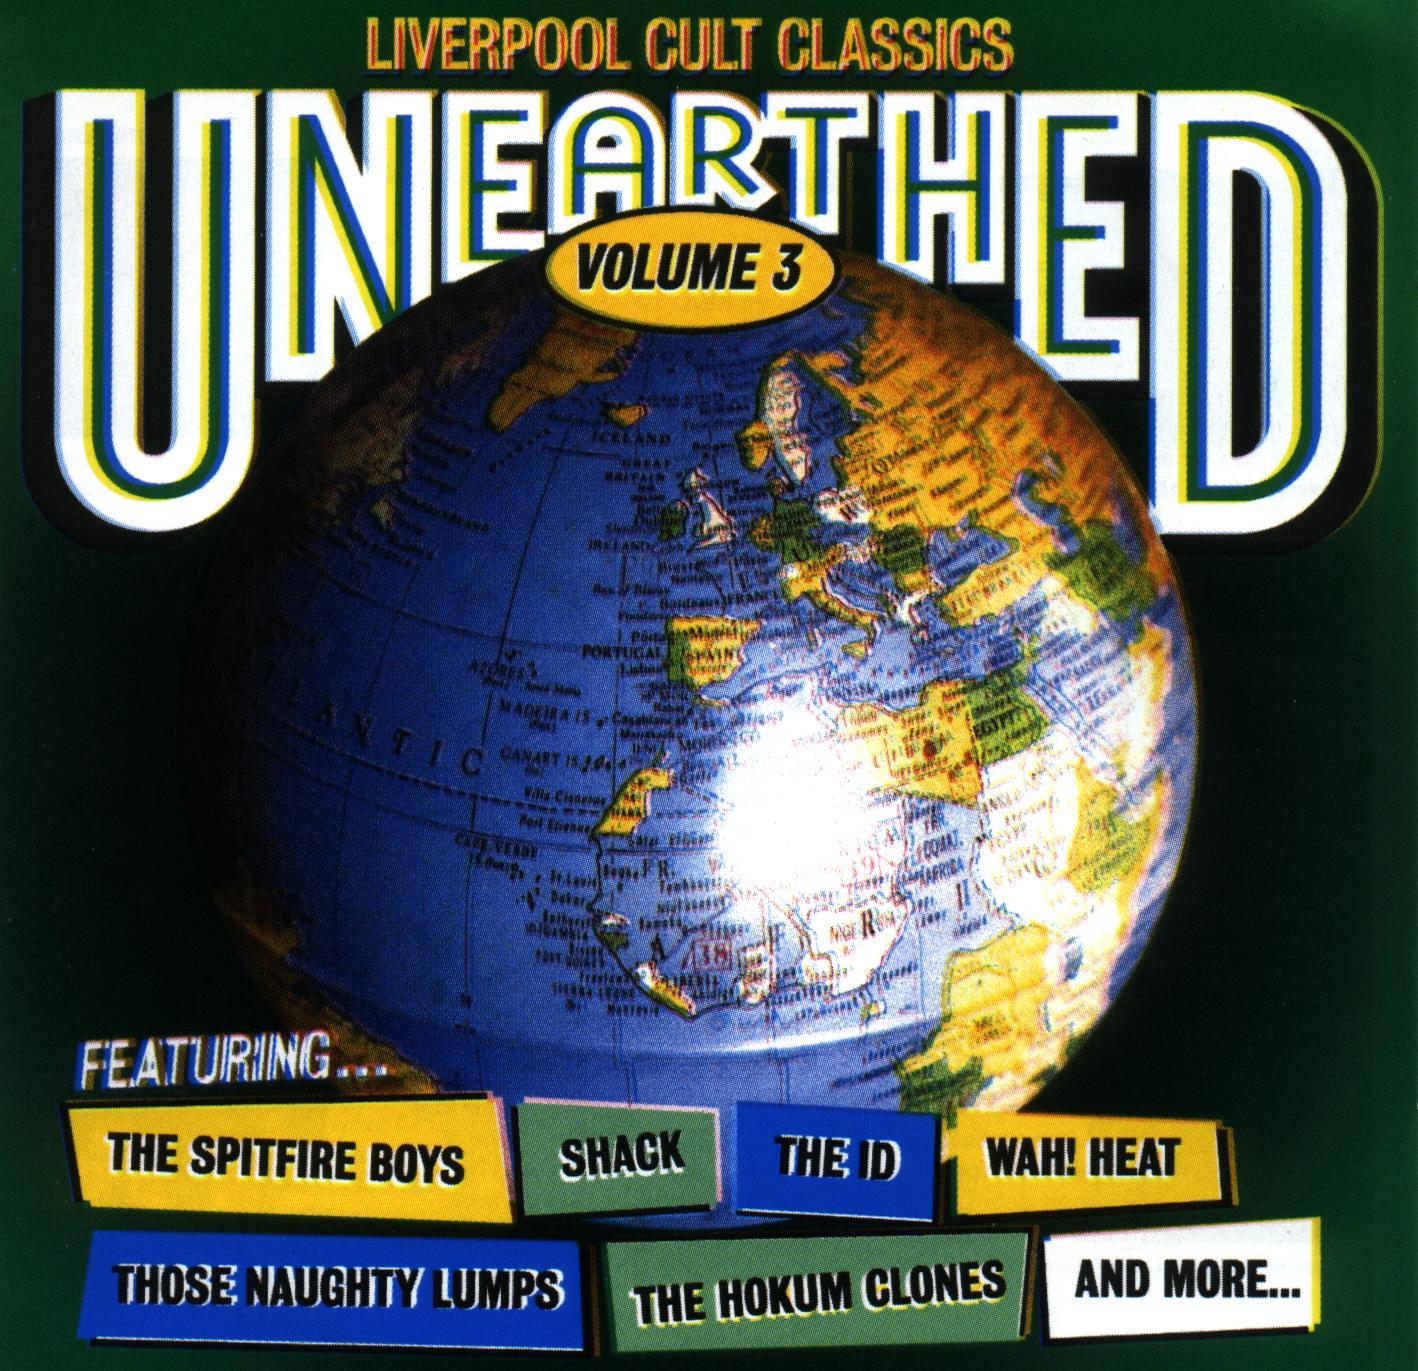 VARIOUS - Unearthed: Liverpool Cult Classics Volume 3